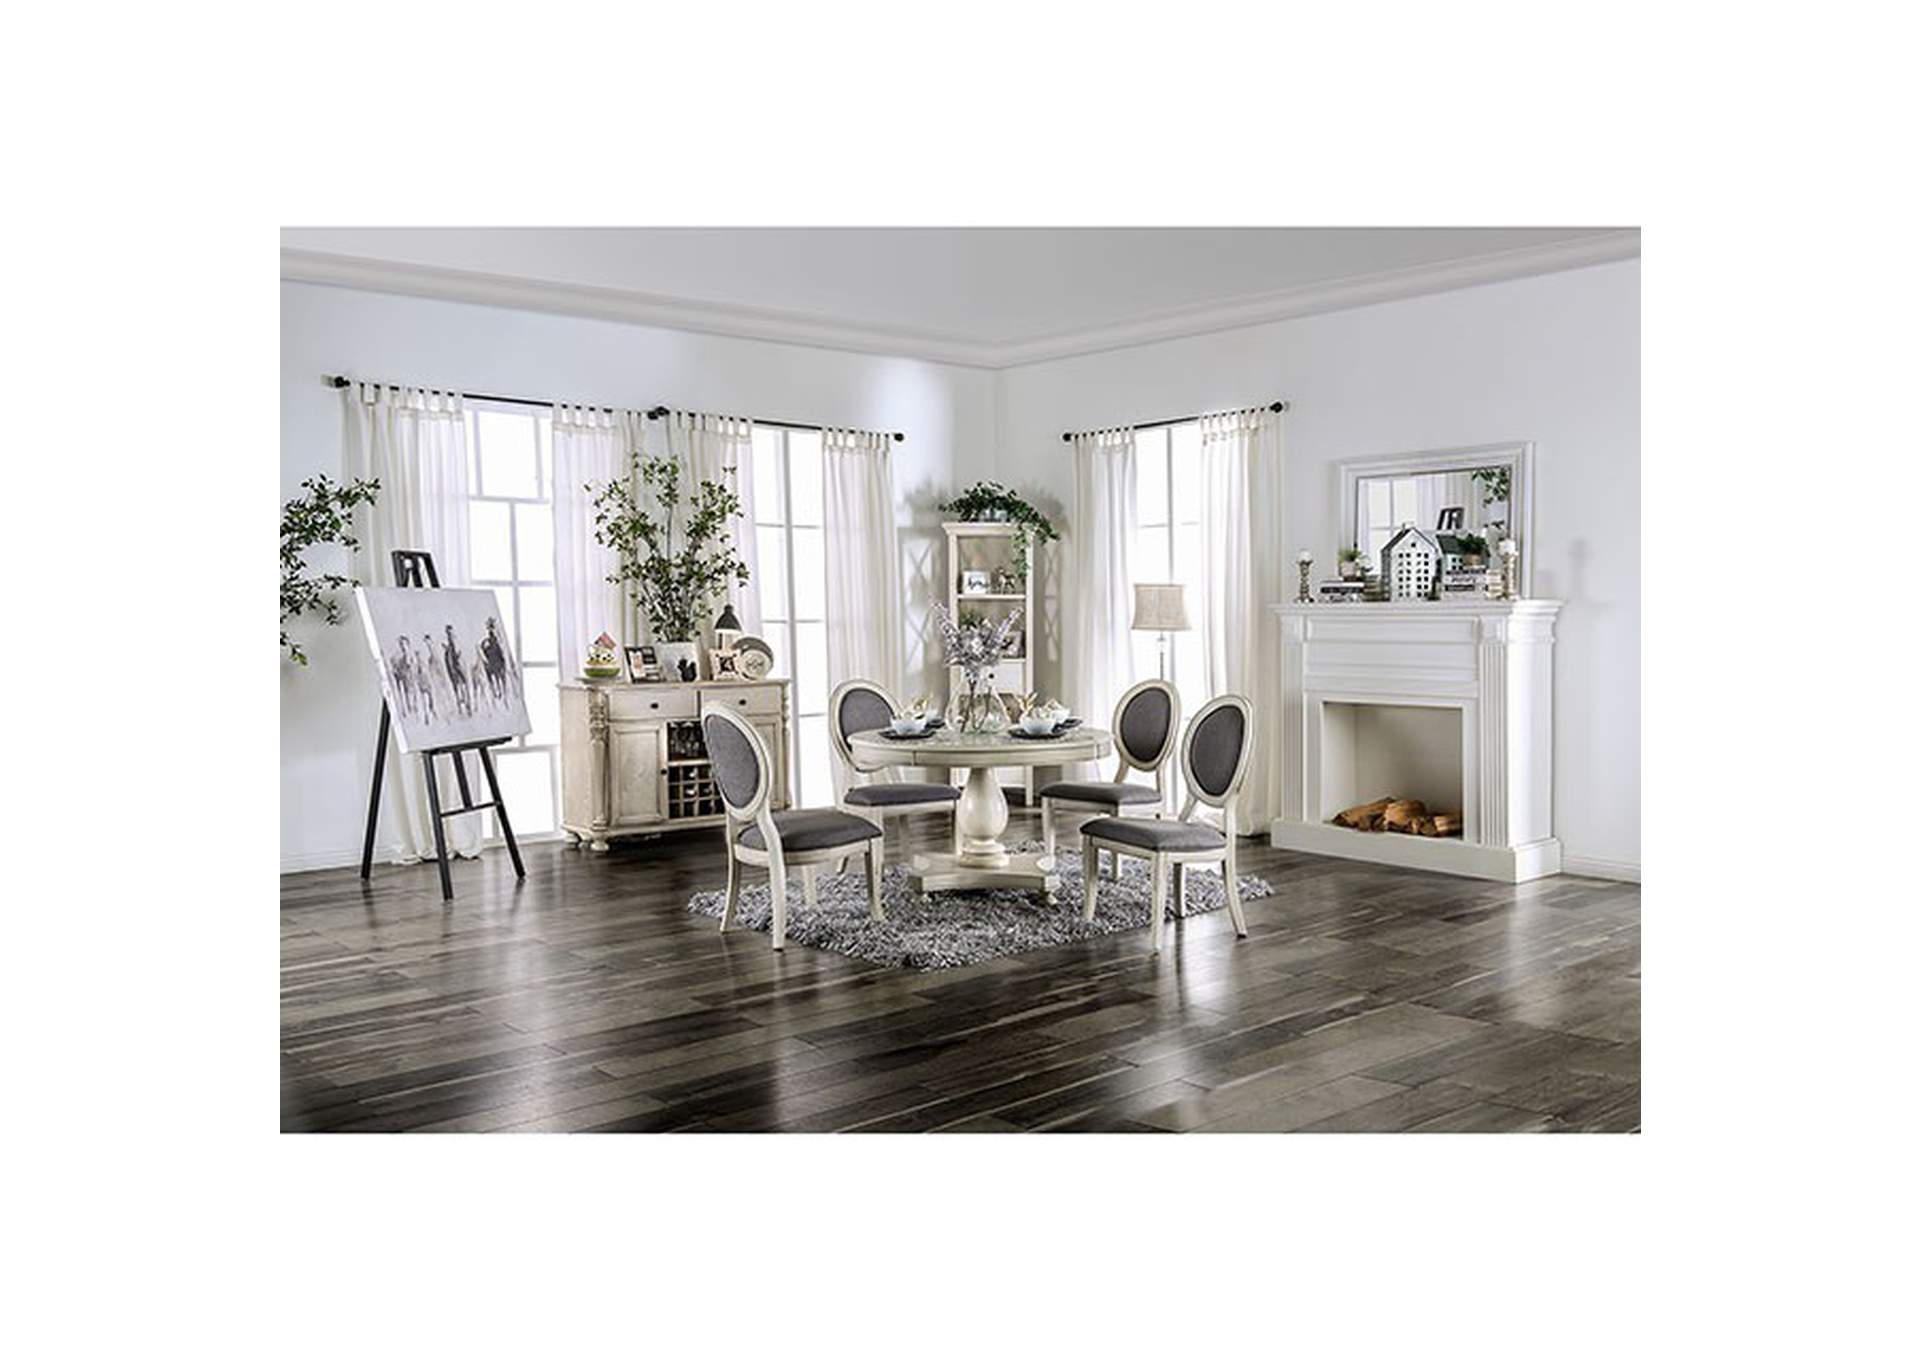 Kathryn Antique White Round Dining Table,Furniture of America